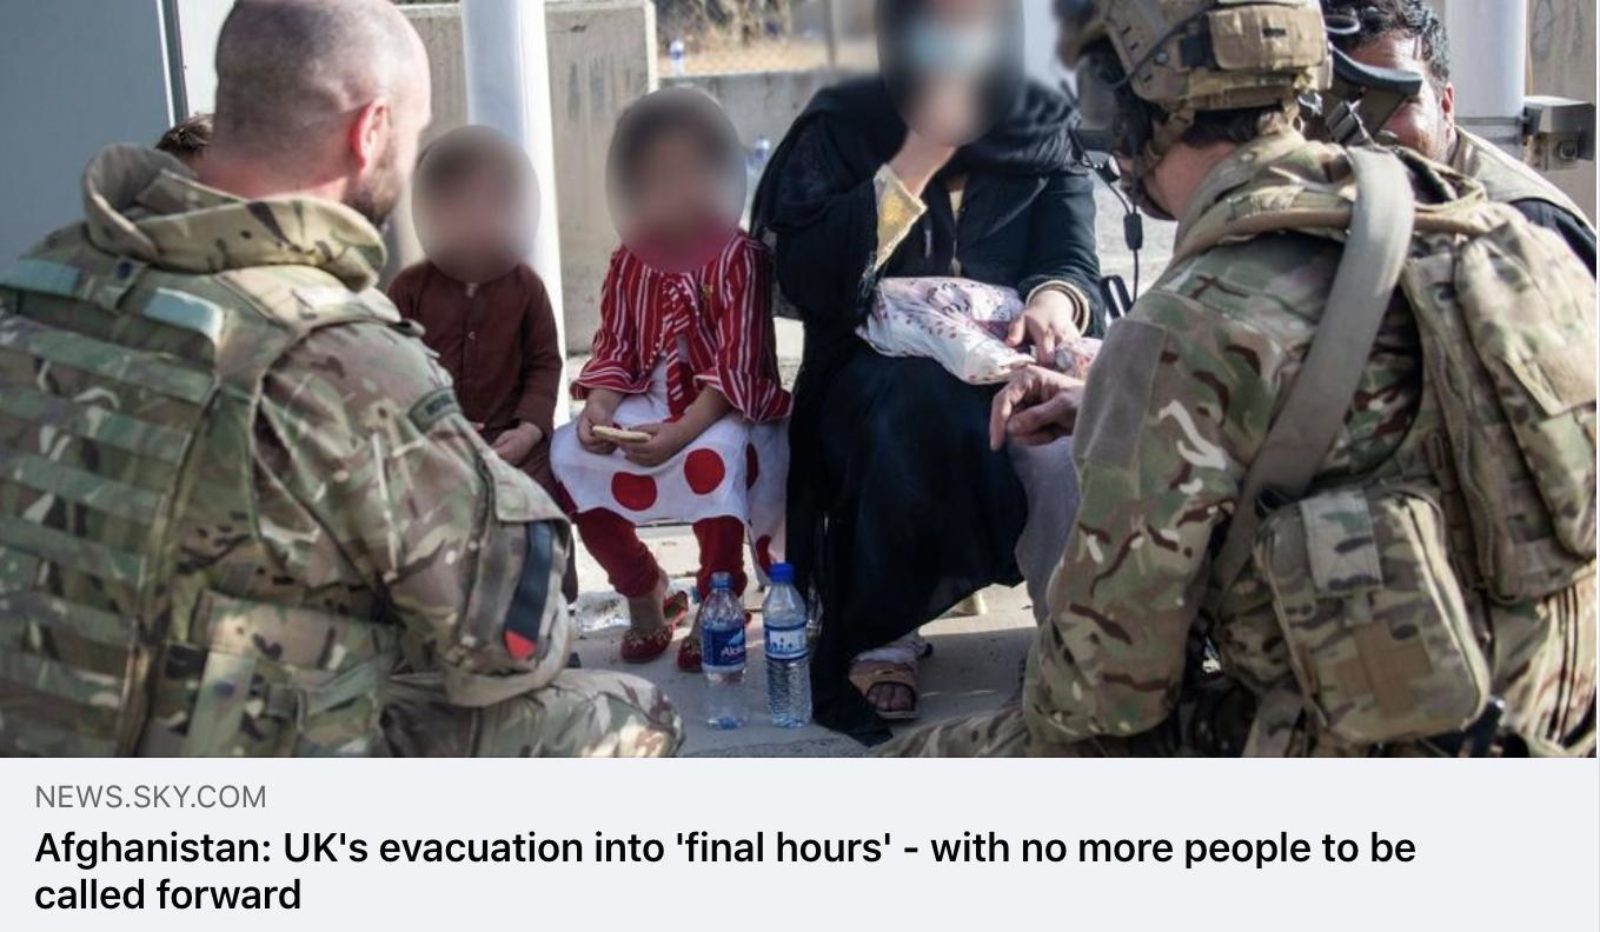 Image of Sky news article with a picture of two soldiers with four other people. Article title reads "Afghanistan: UK